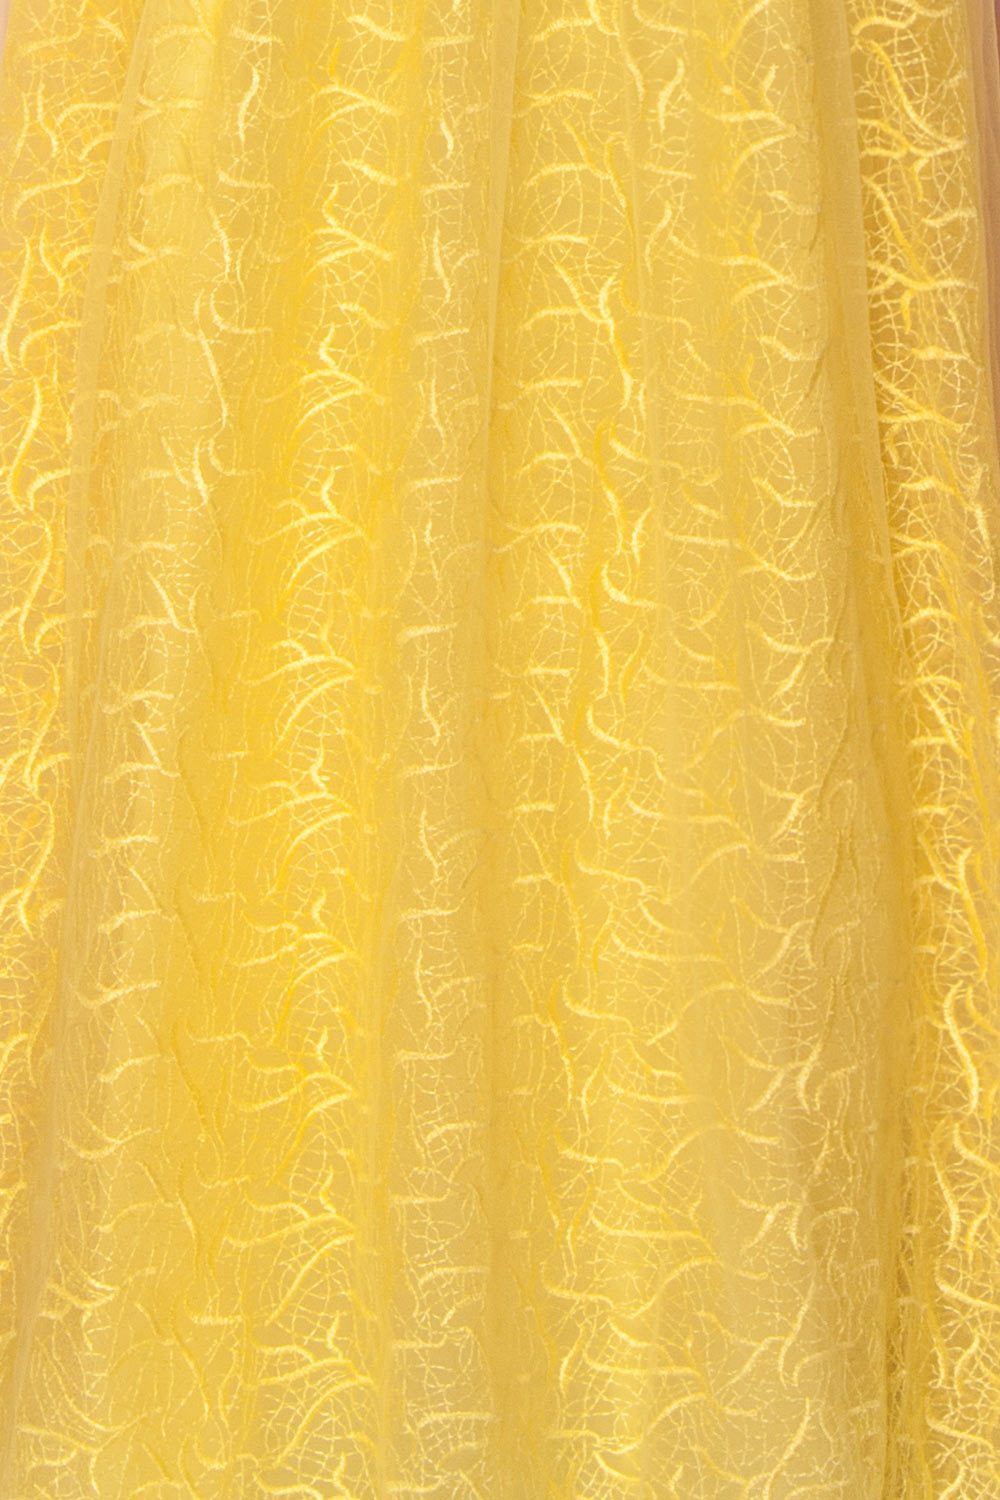 Samadi Soleil Yellow Embroidered Maxi Gown fabric detail | Boutique 1861